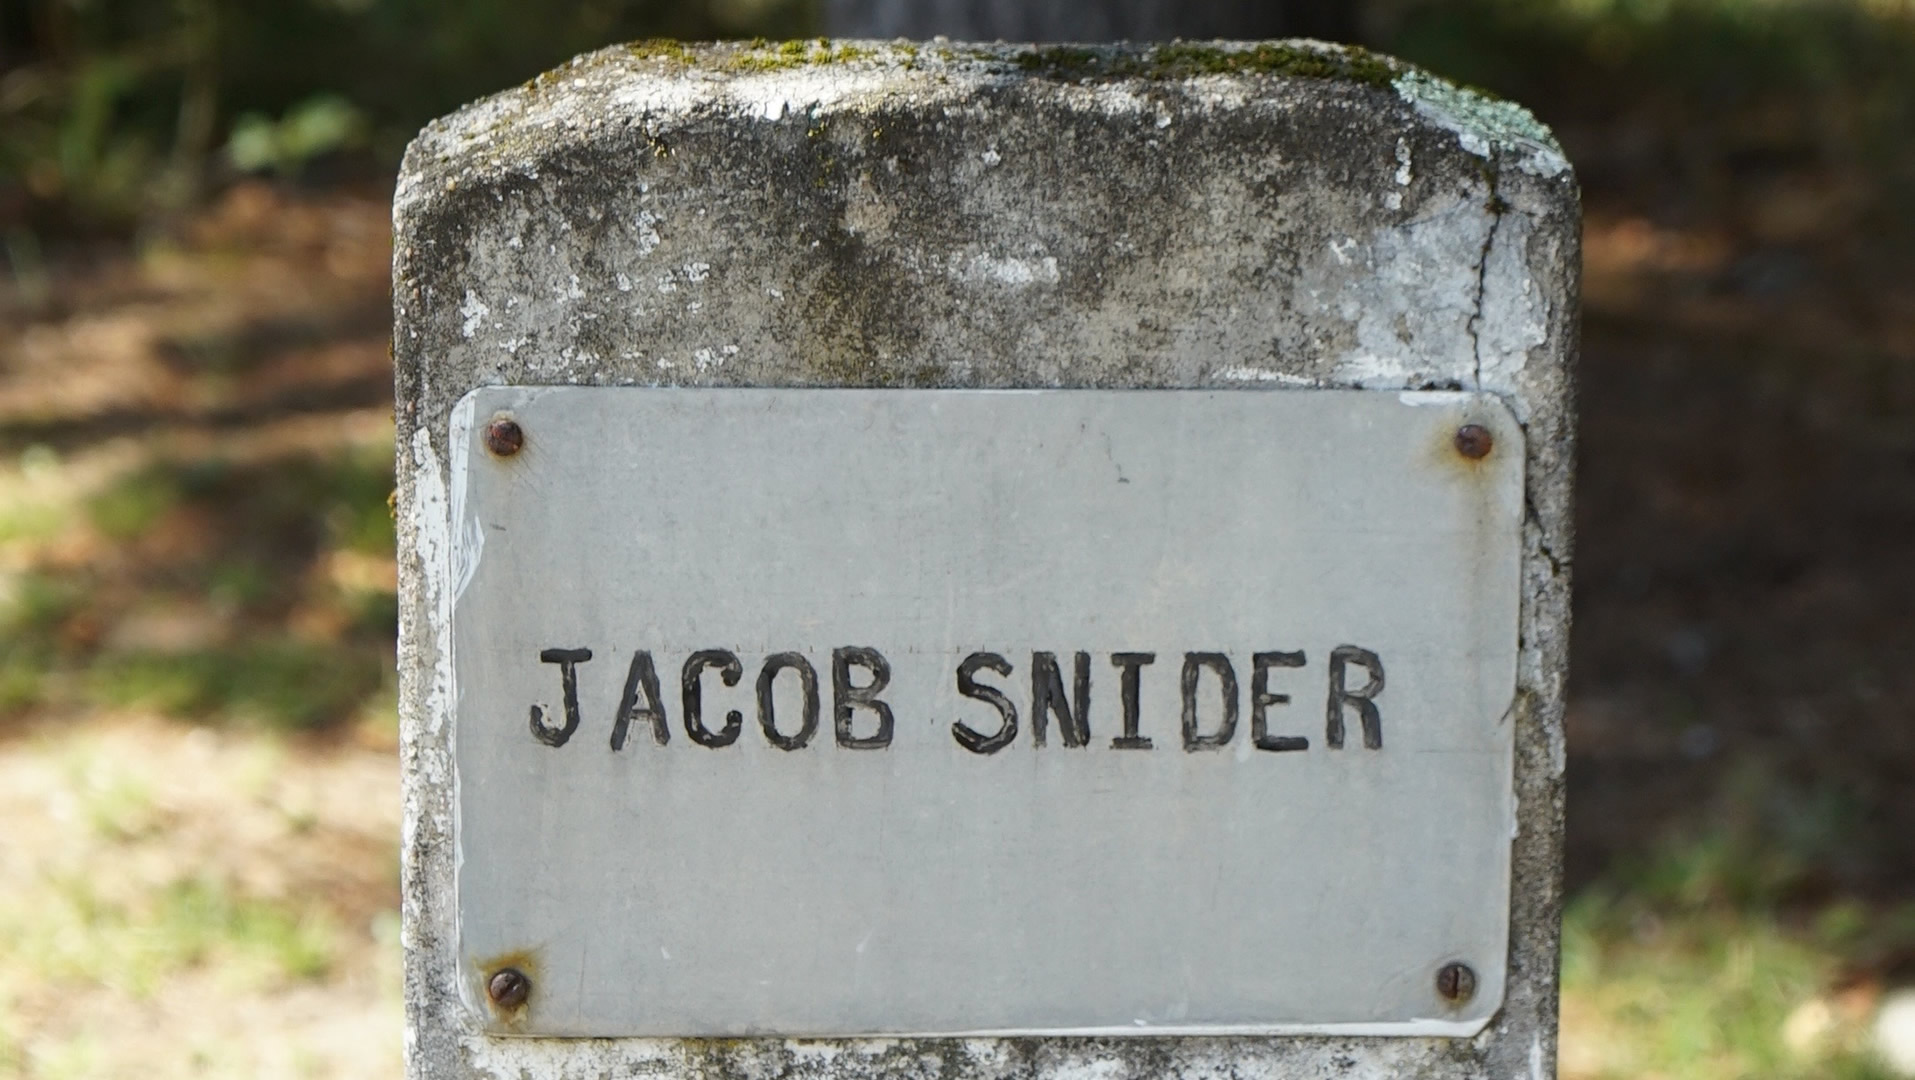 Jacob Snider grave at Glenfield Cemetery.